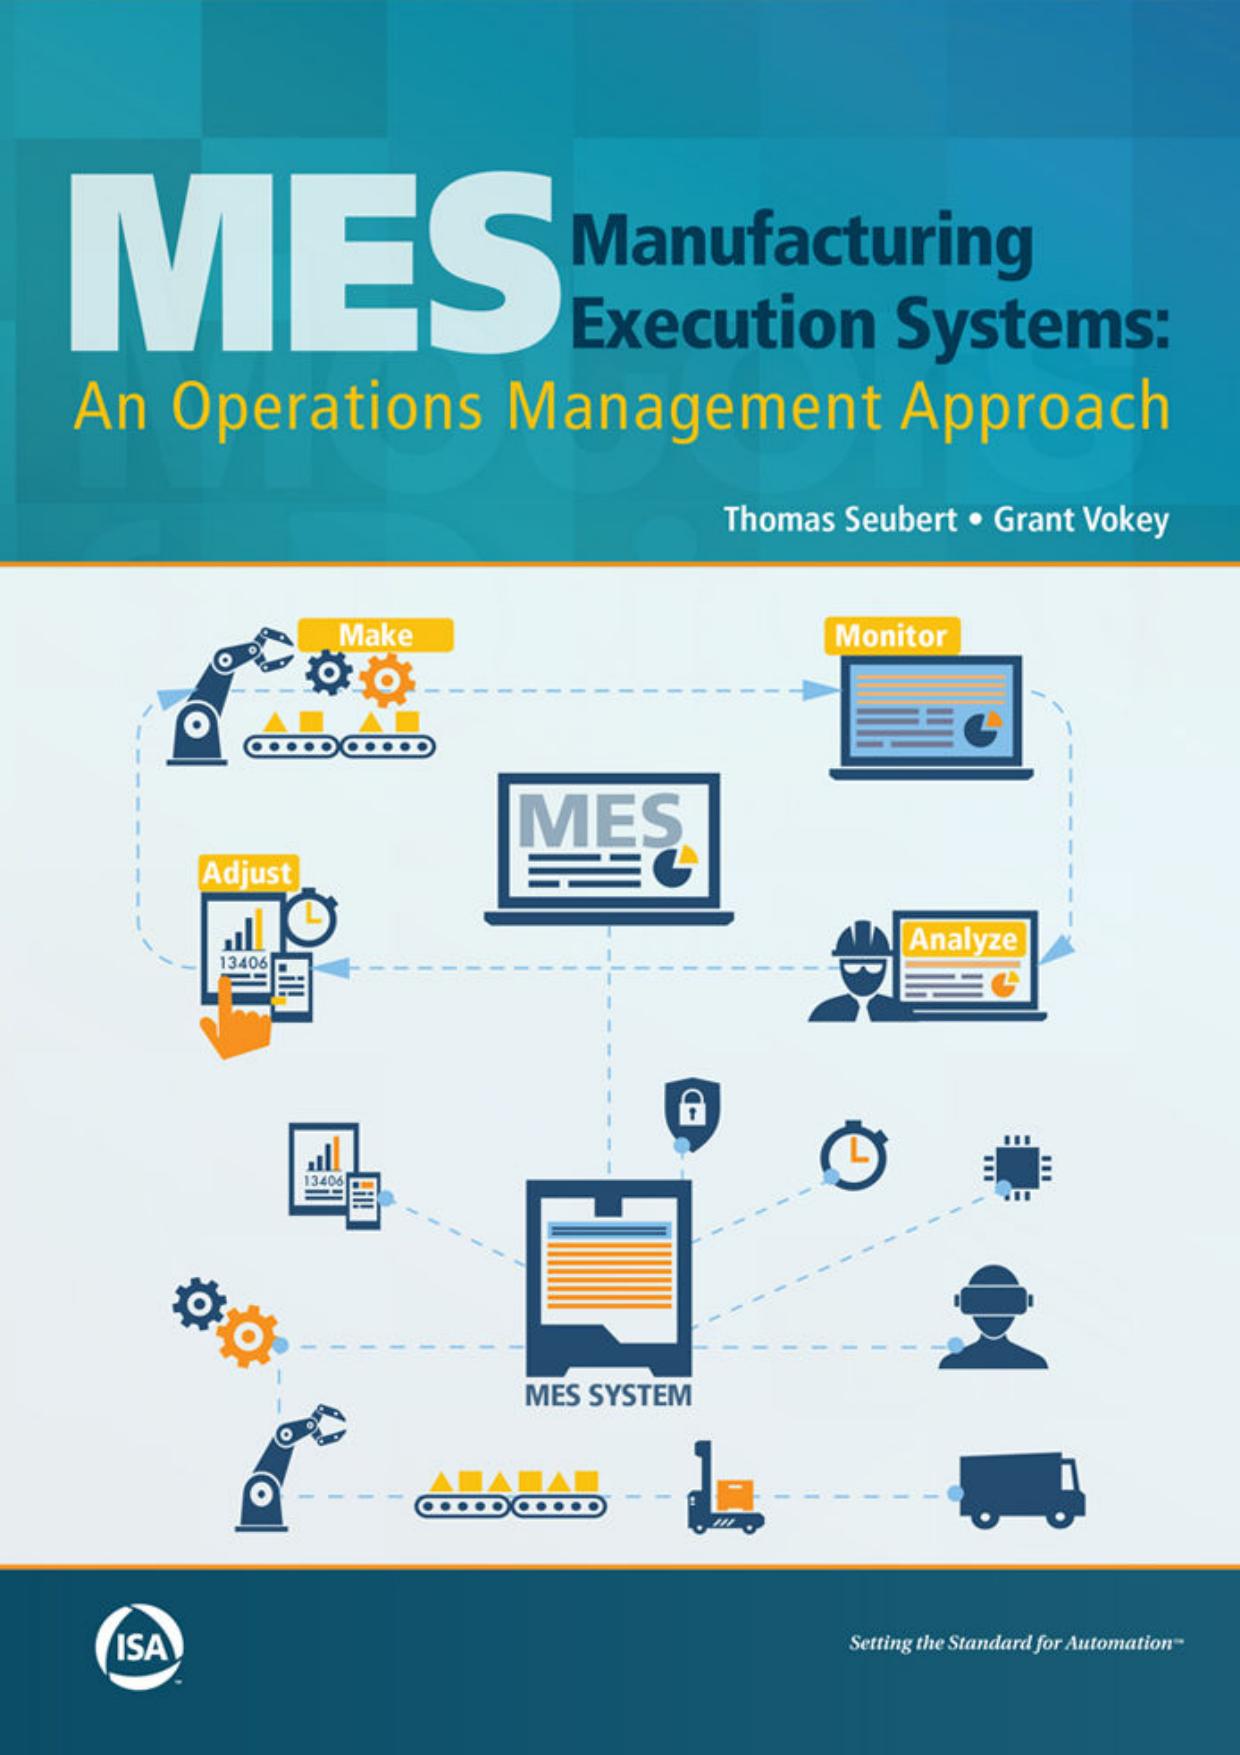 Manufacturing Execution Systems: An Operations Management Approach by  Tom Seubert .Grant Vokey